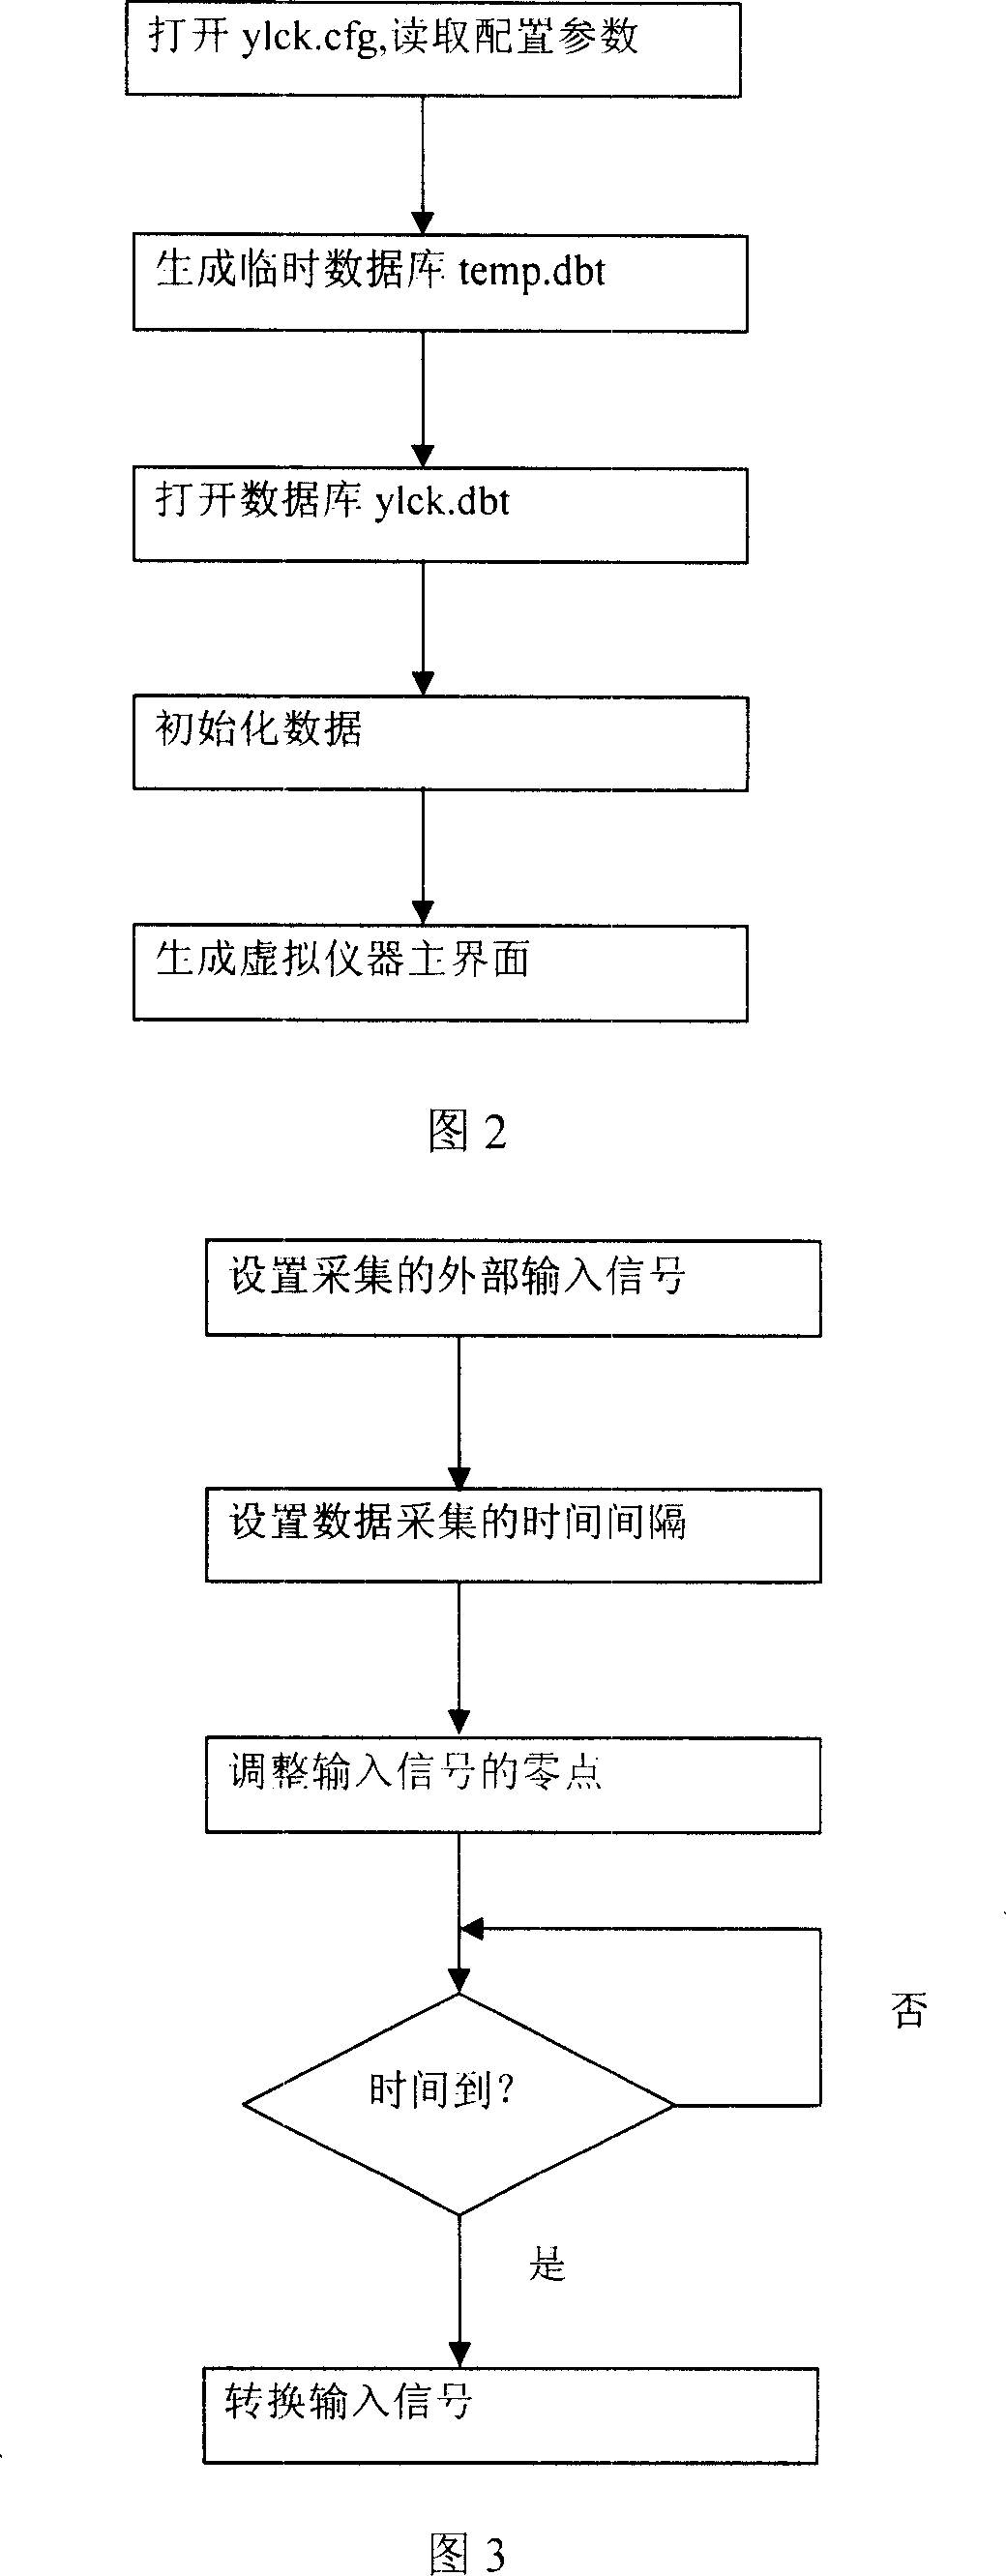 Measurement and control pressure testing system of petroleum well control device